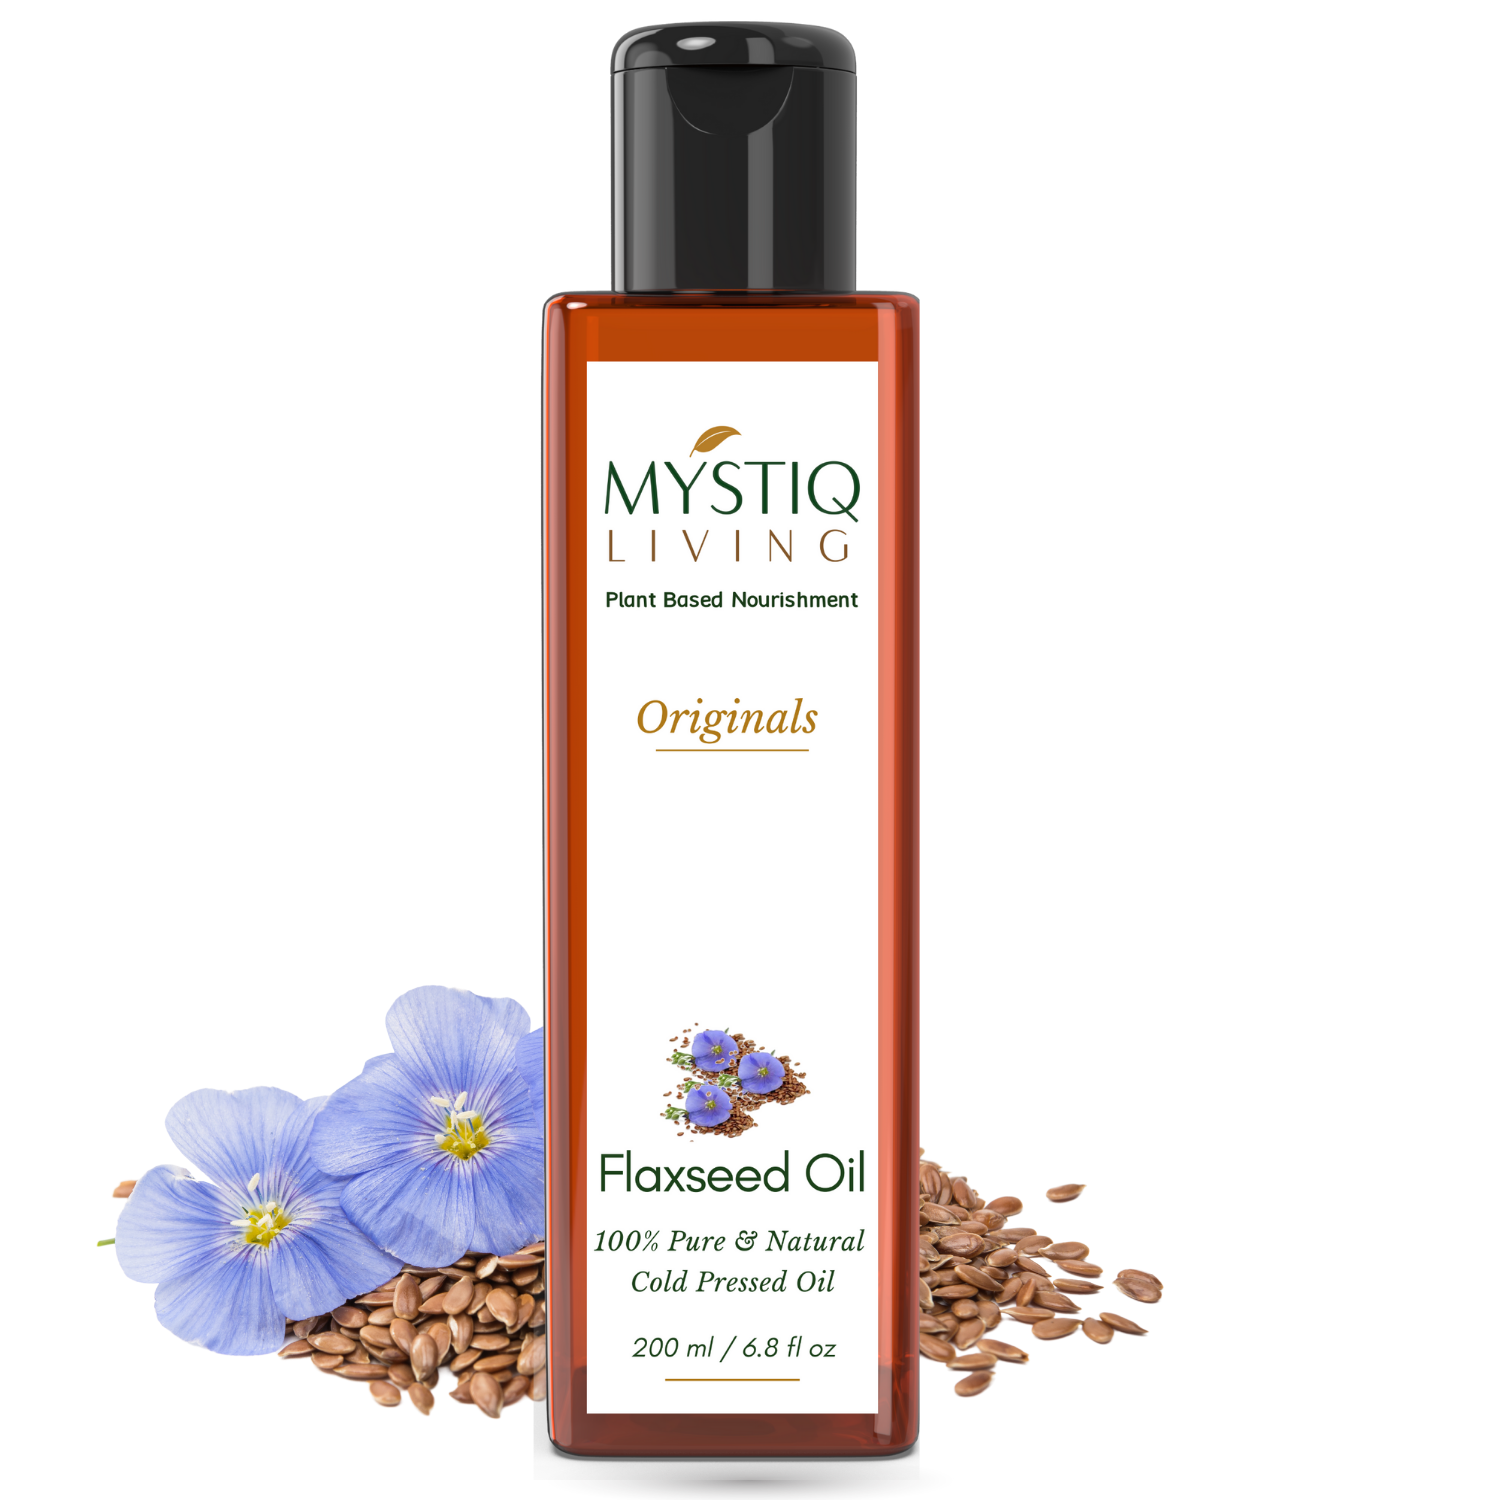 Mystiq Living Flaxseed Oil | Cold Pressed Oil enriched in OMEGA-3 - Mystiq Living